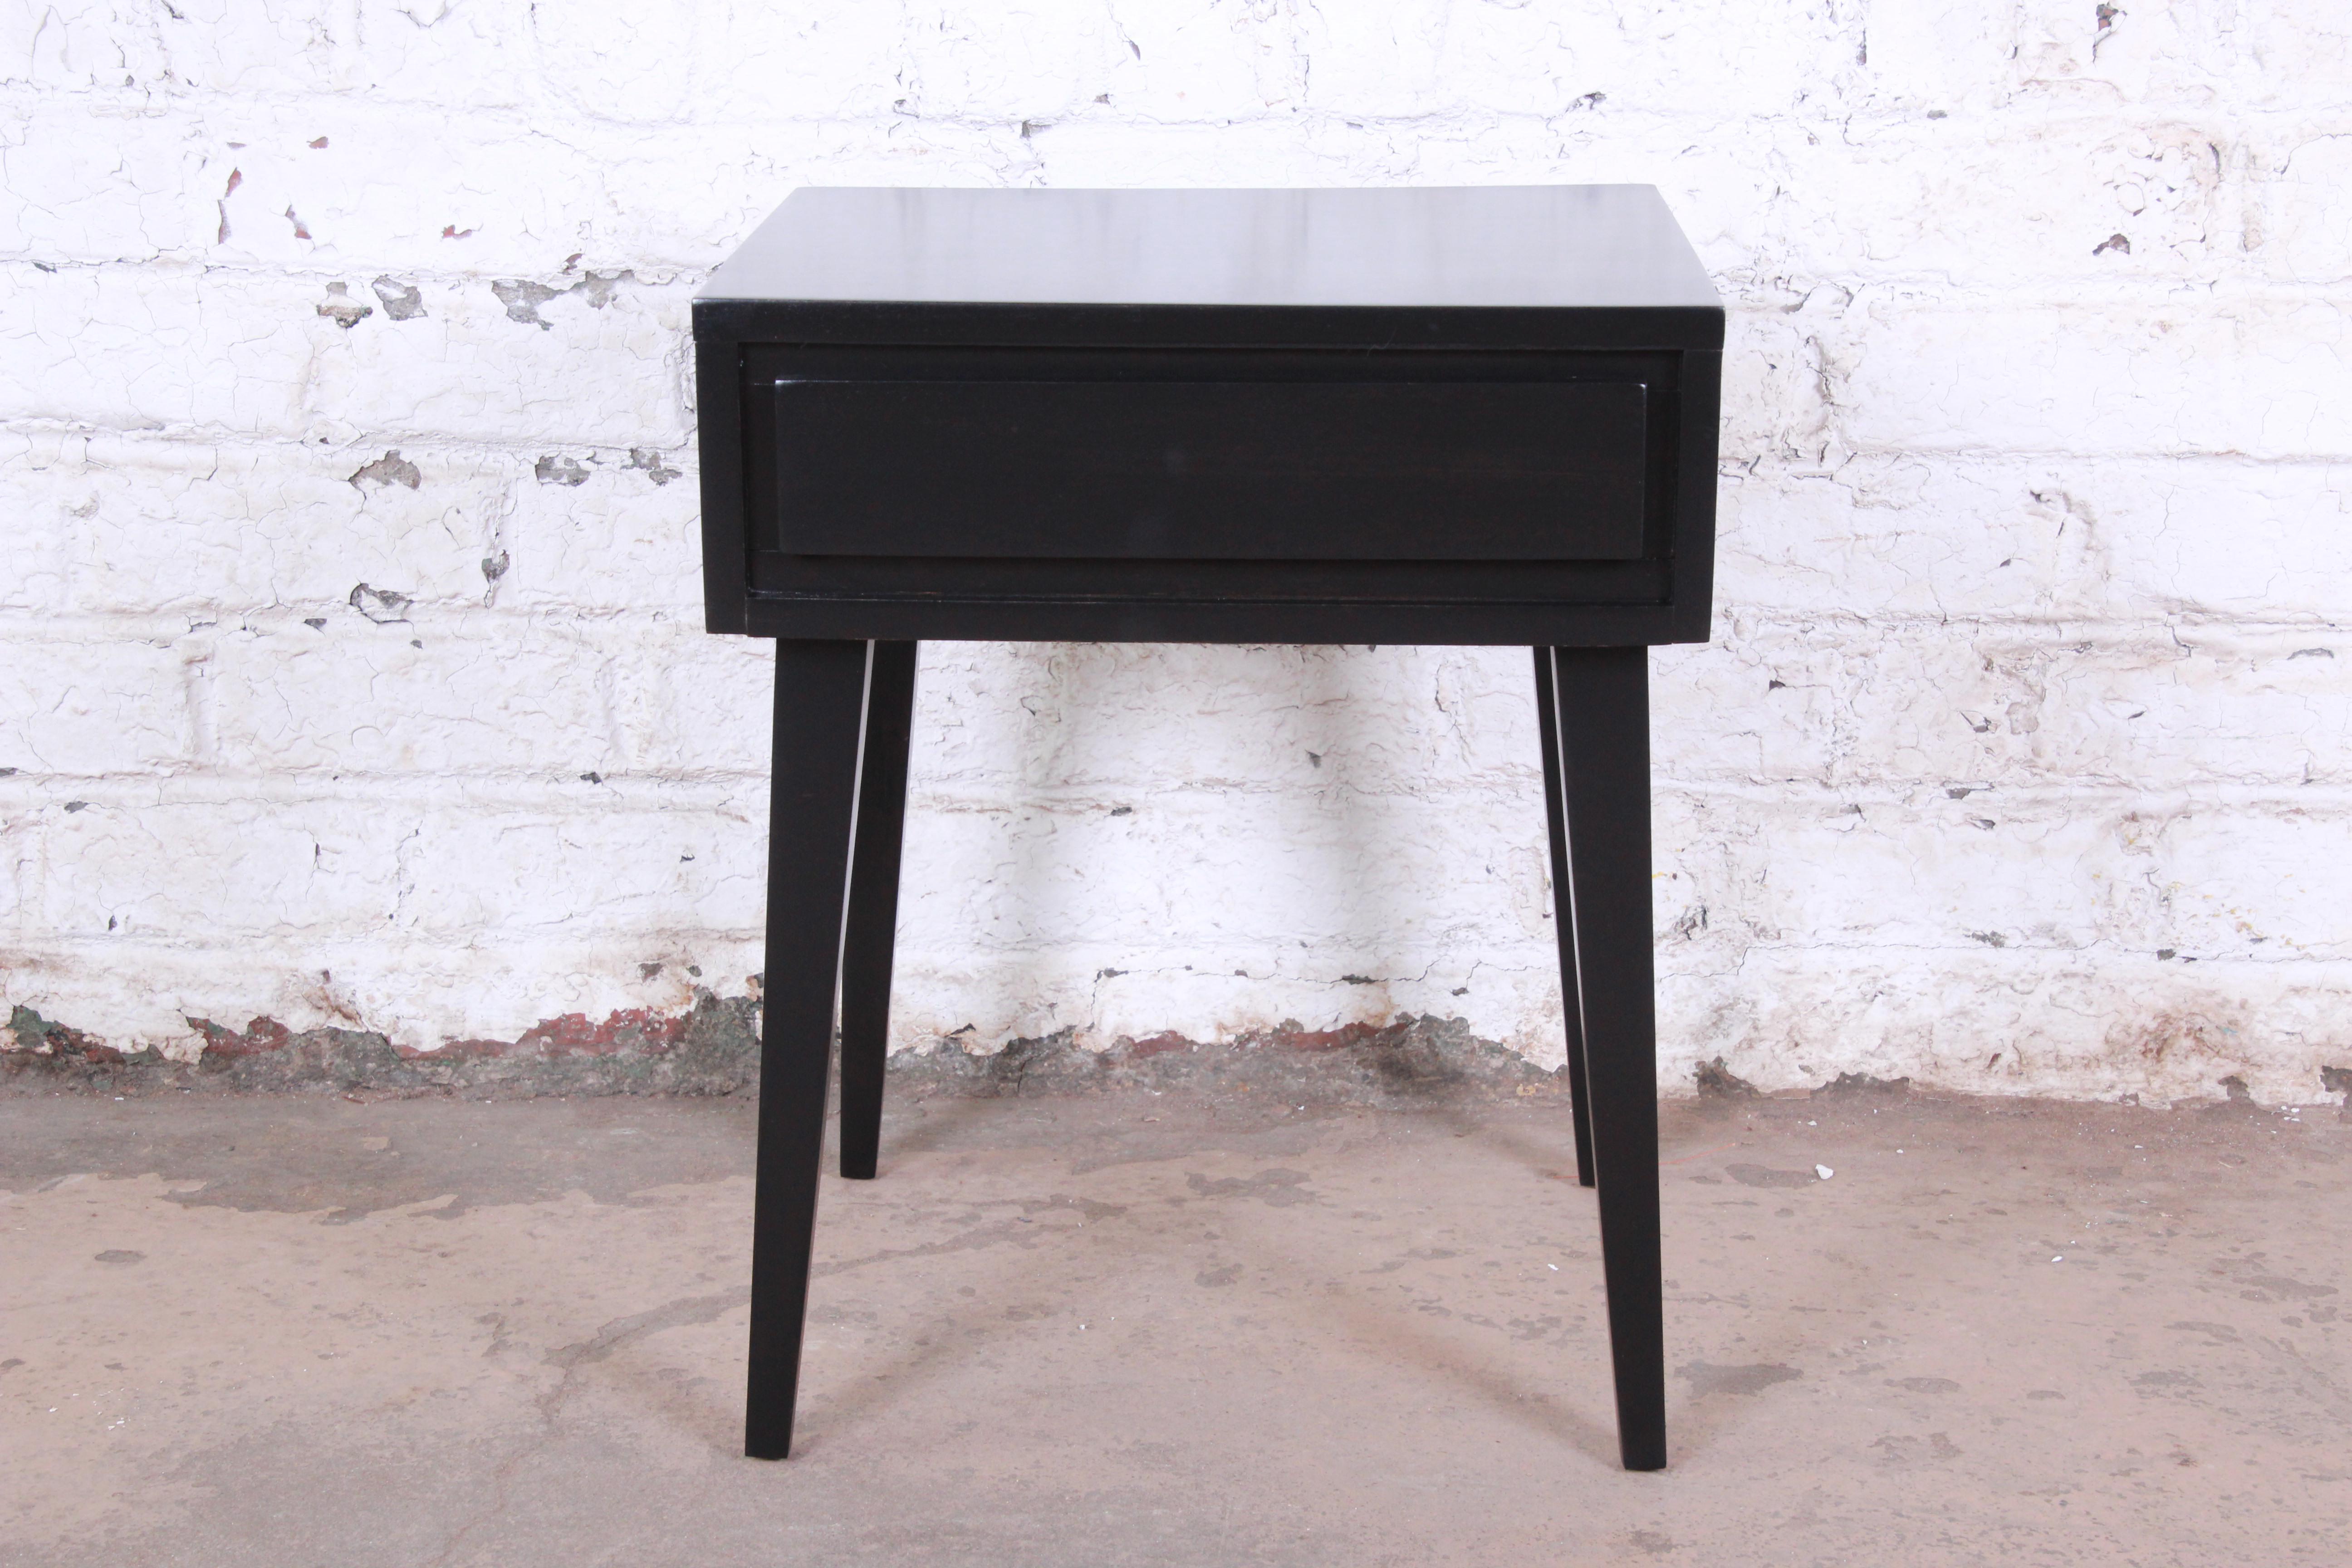 An exceptional Mid-Century Modern ebonized nightstand or end table designed by Russel Wright for his American Modern line for Conant Ball. The nightstand features solid birch wood construction, with sleek, Minimalist Mid-Century Modern design. The